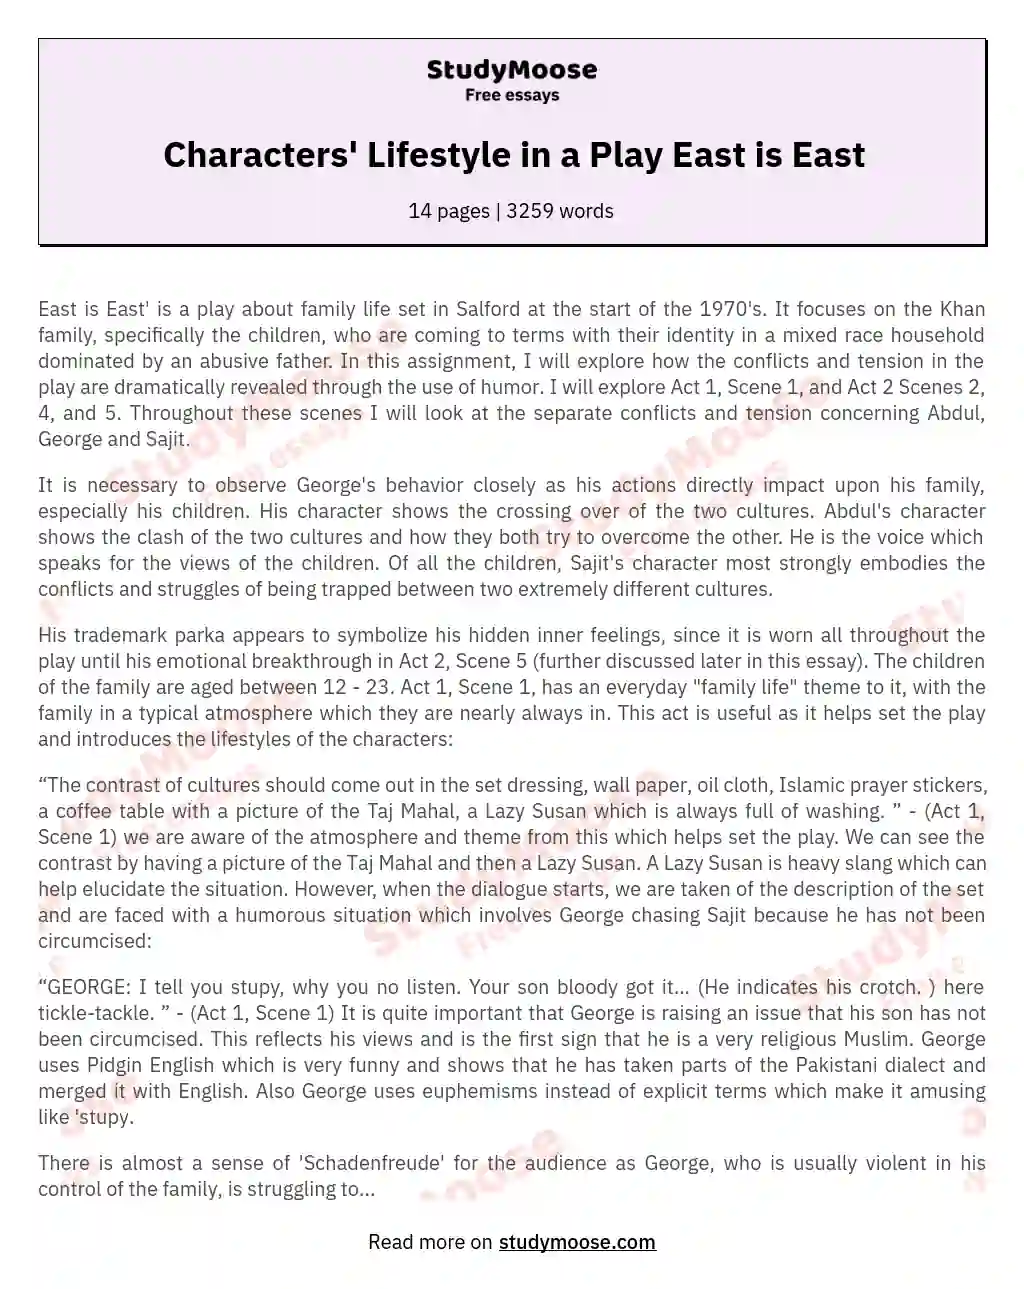 Characters' Lifestyle in a Play East is East